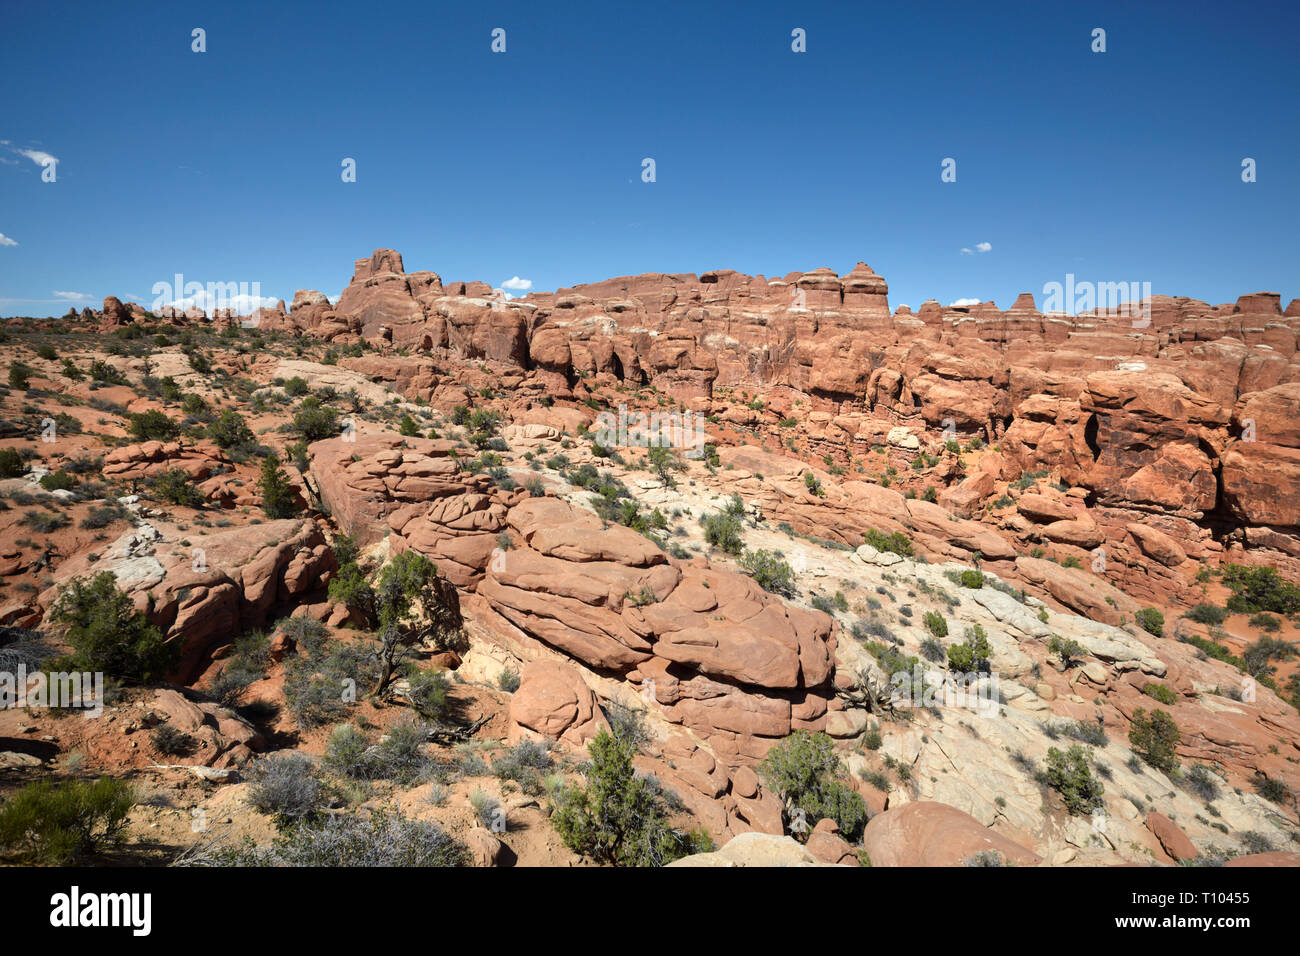 Fiery Furnace rock formation, Arches National Park, Utah, USA. Stock Photo